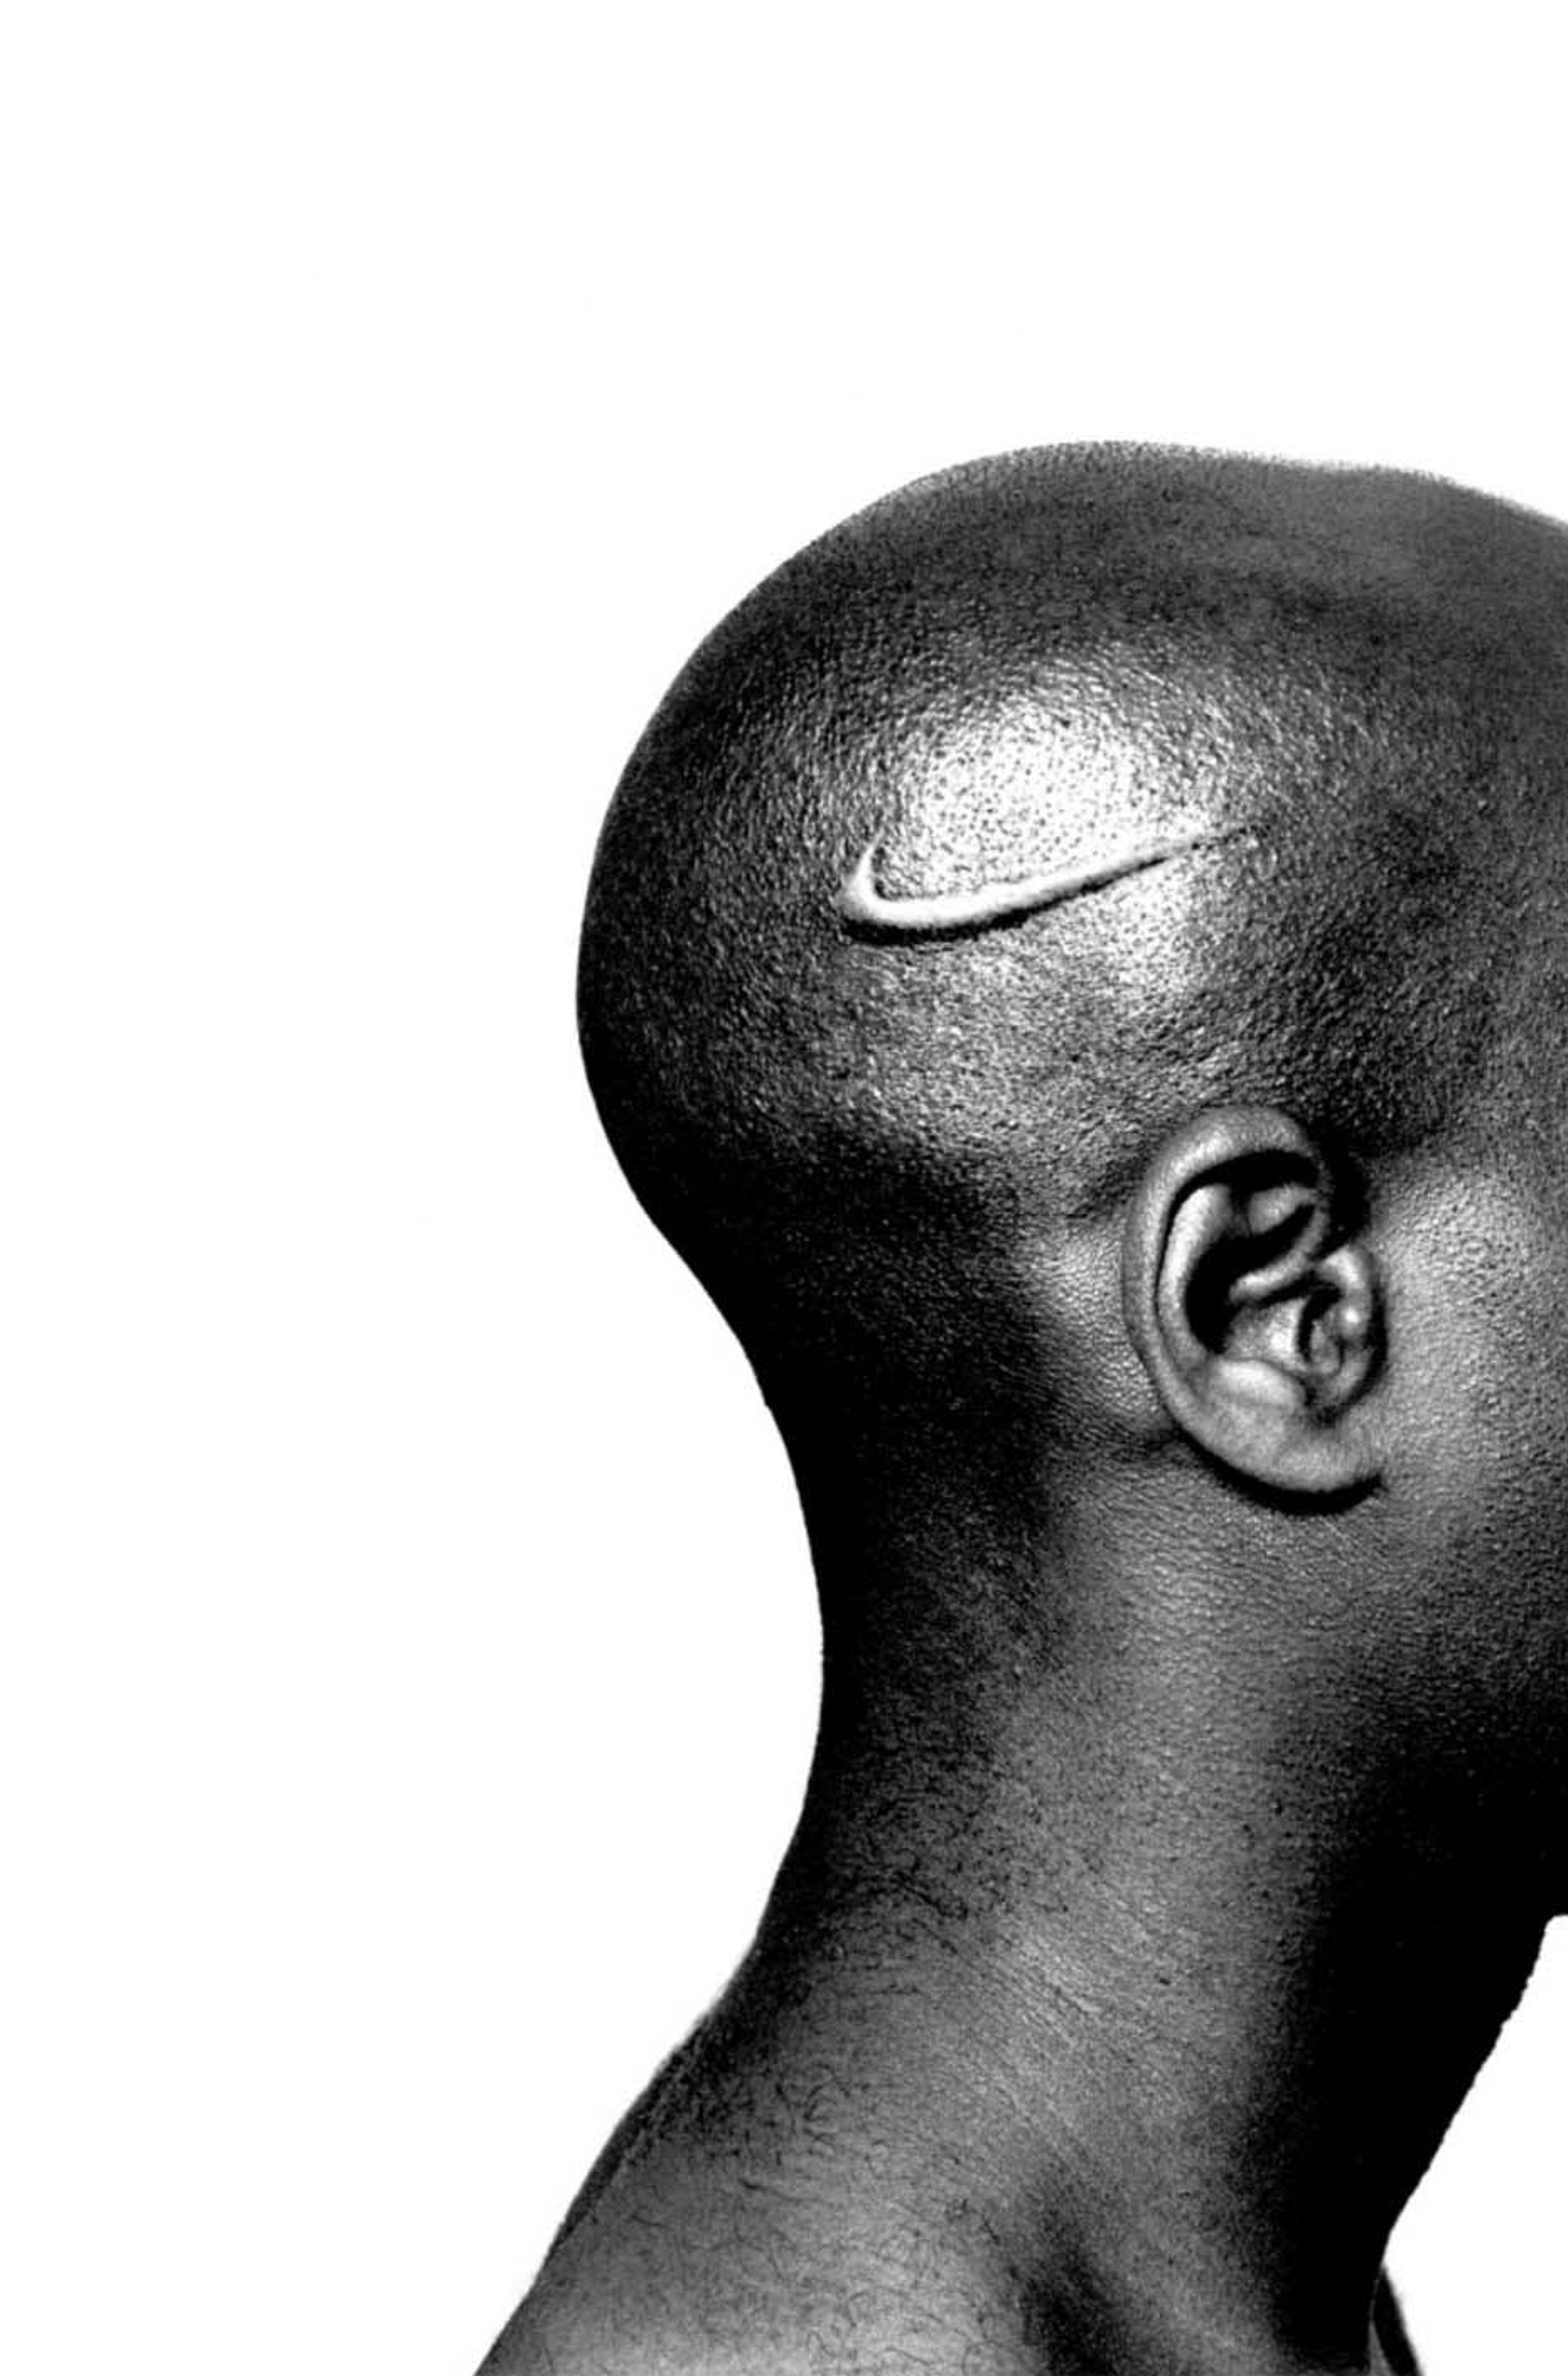 The head profile of a black man branded with a Nike logo